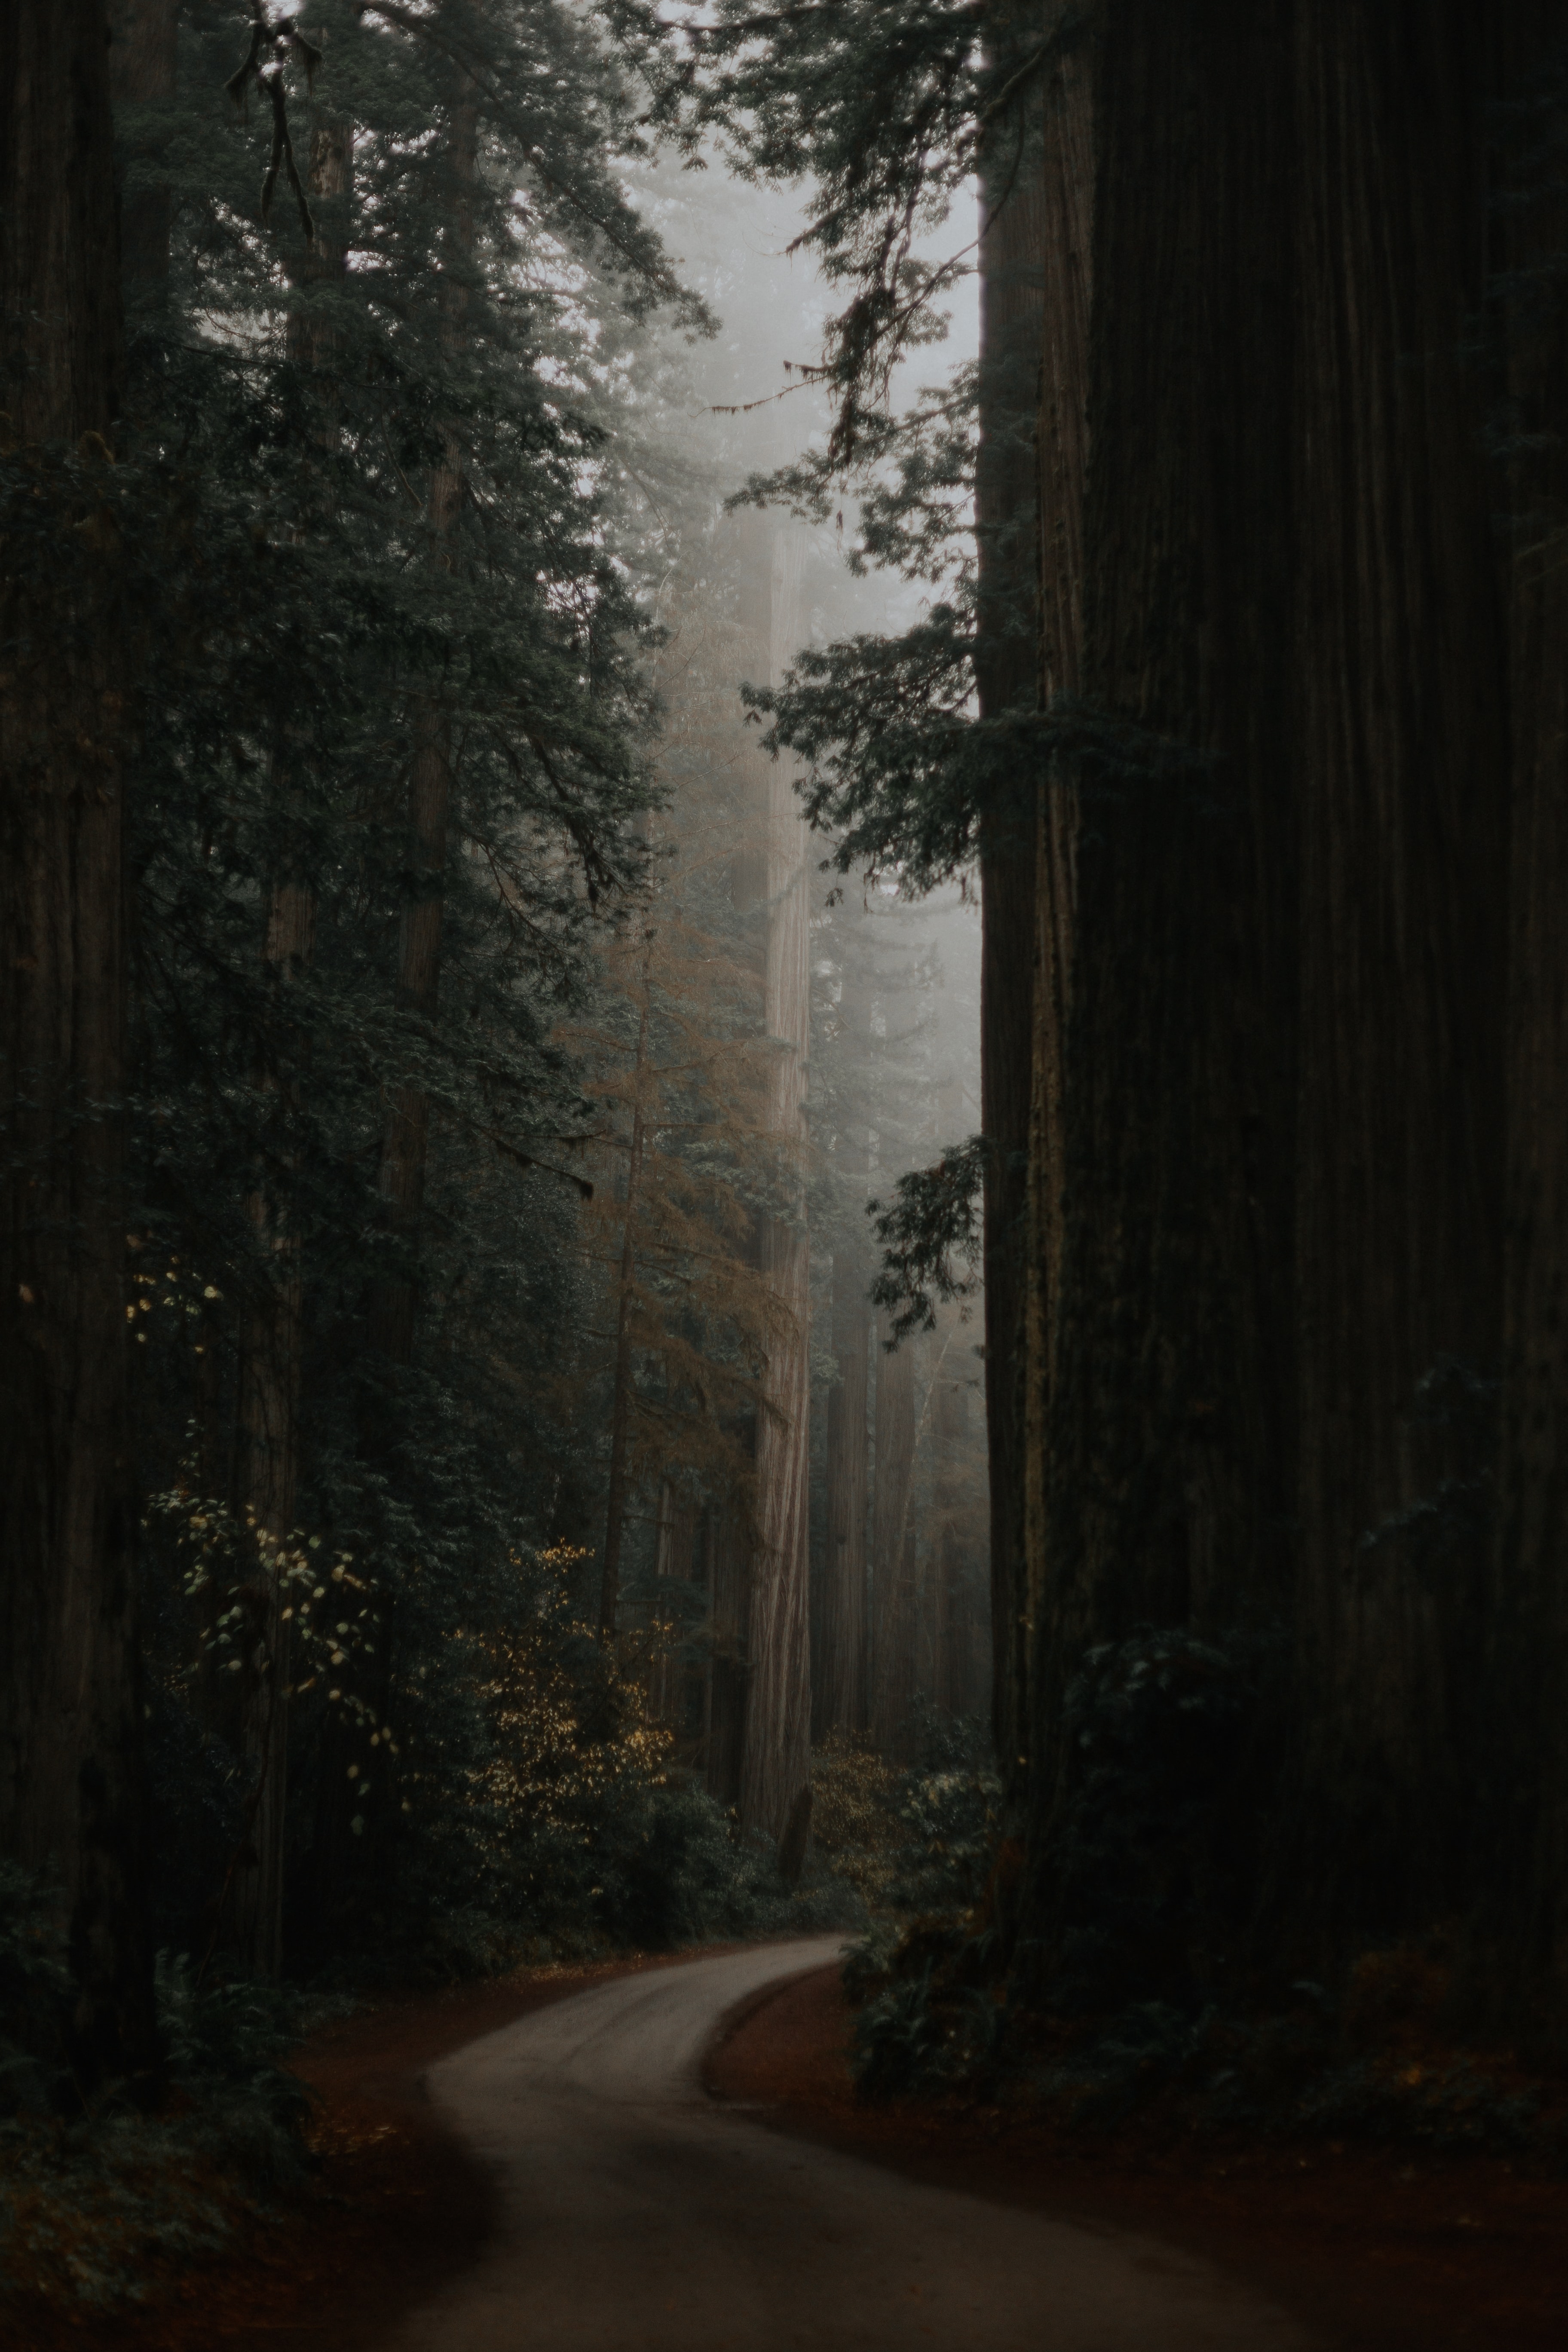 trees, nature, road, forest, alley wallpaper for mobile